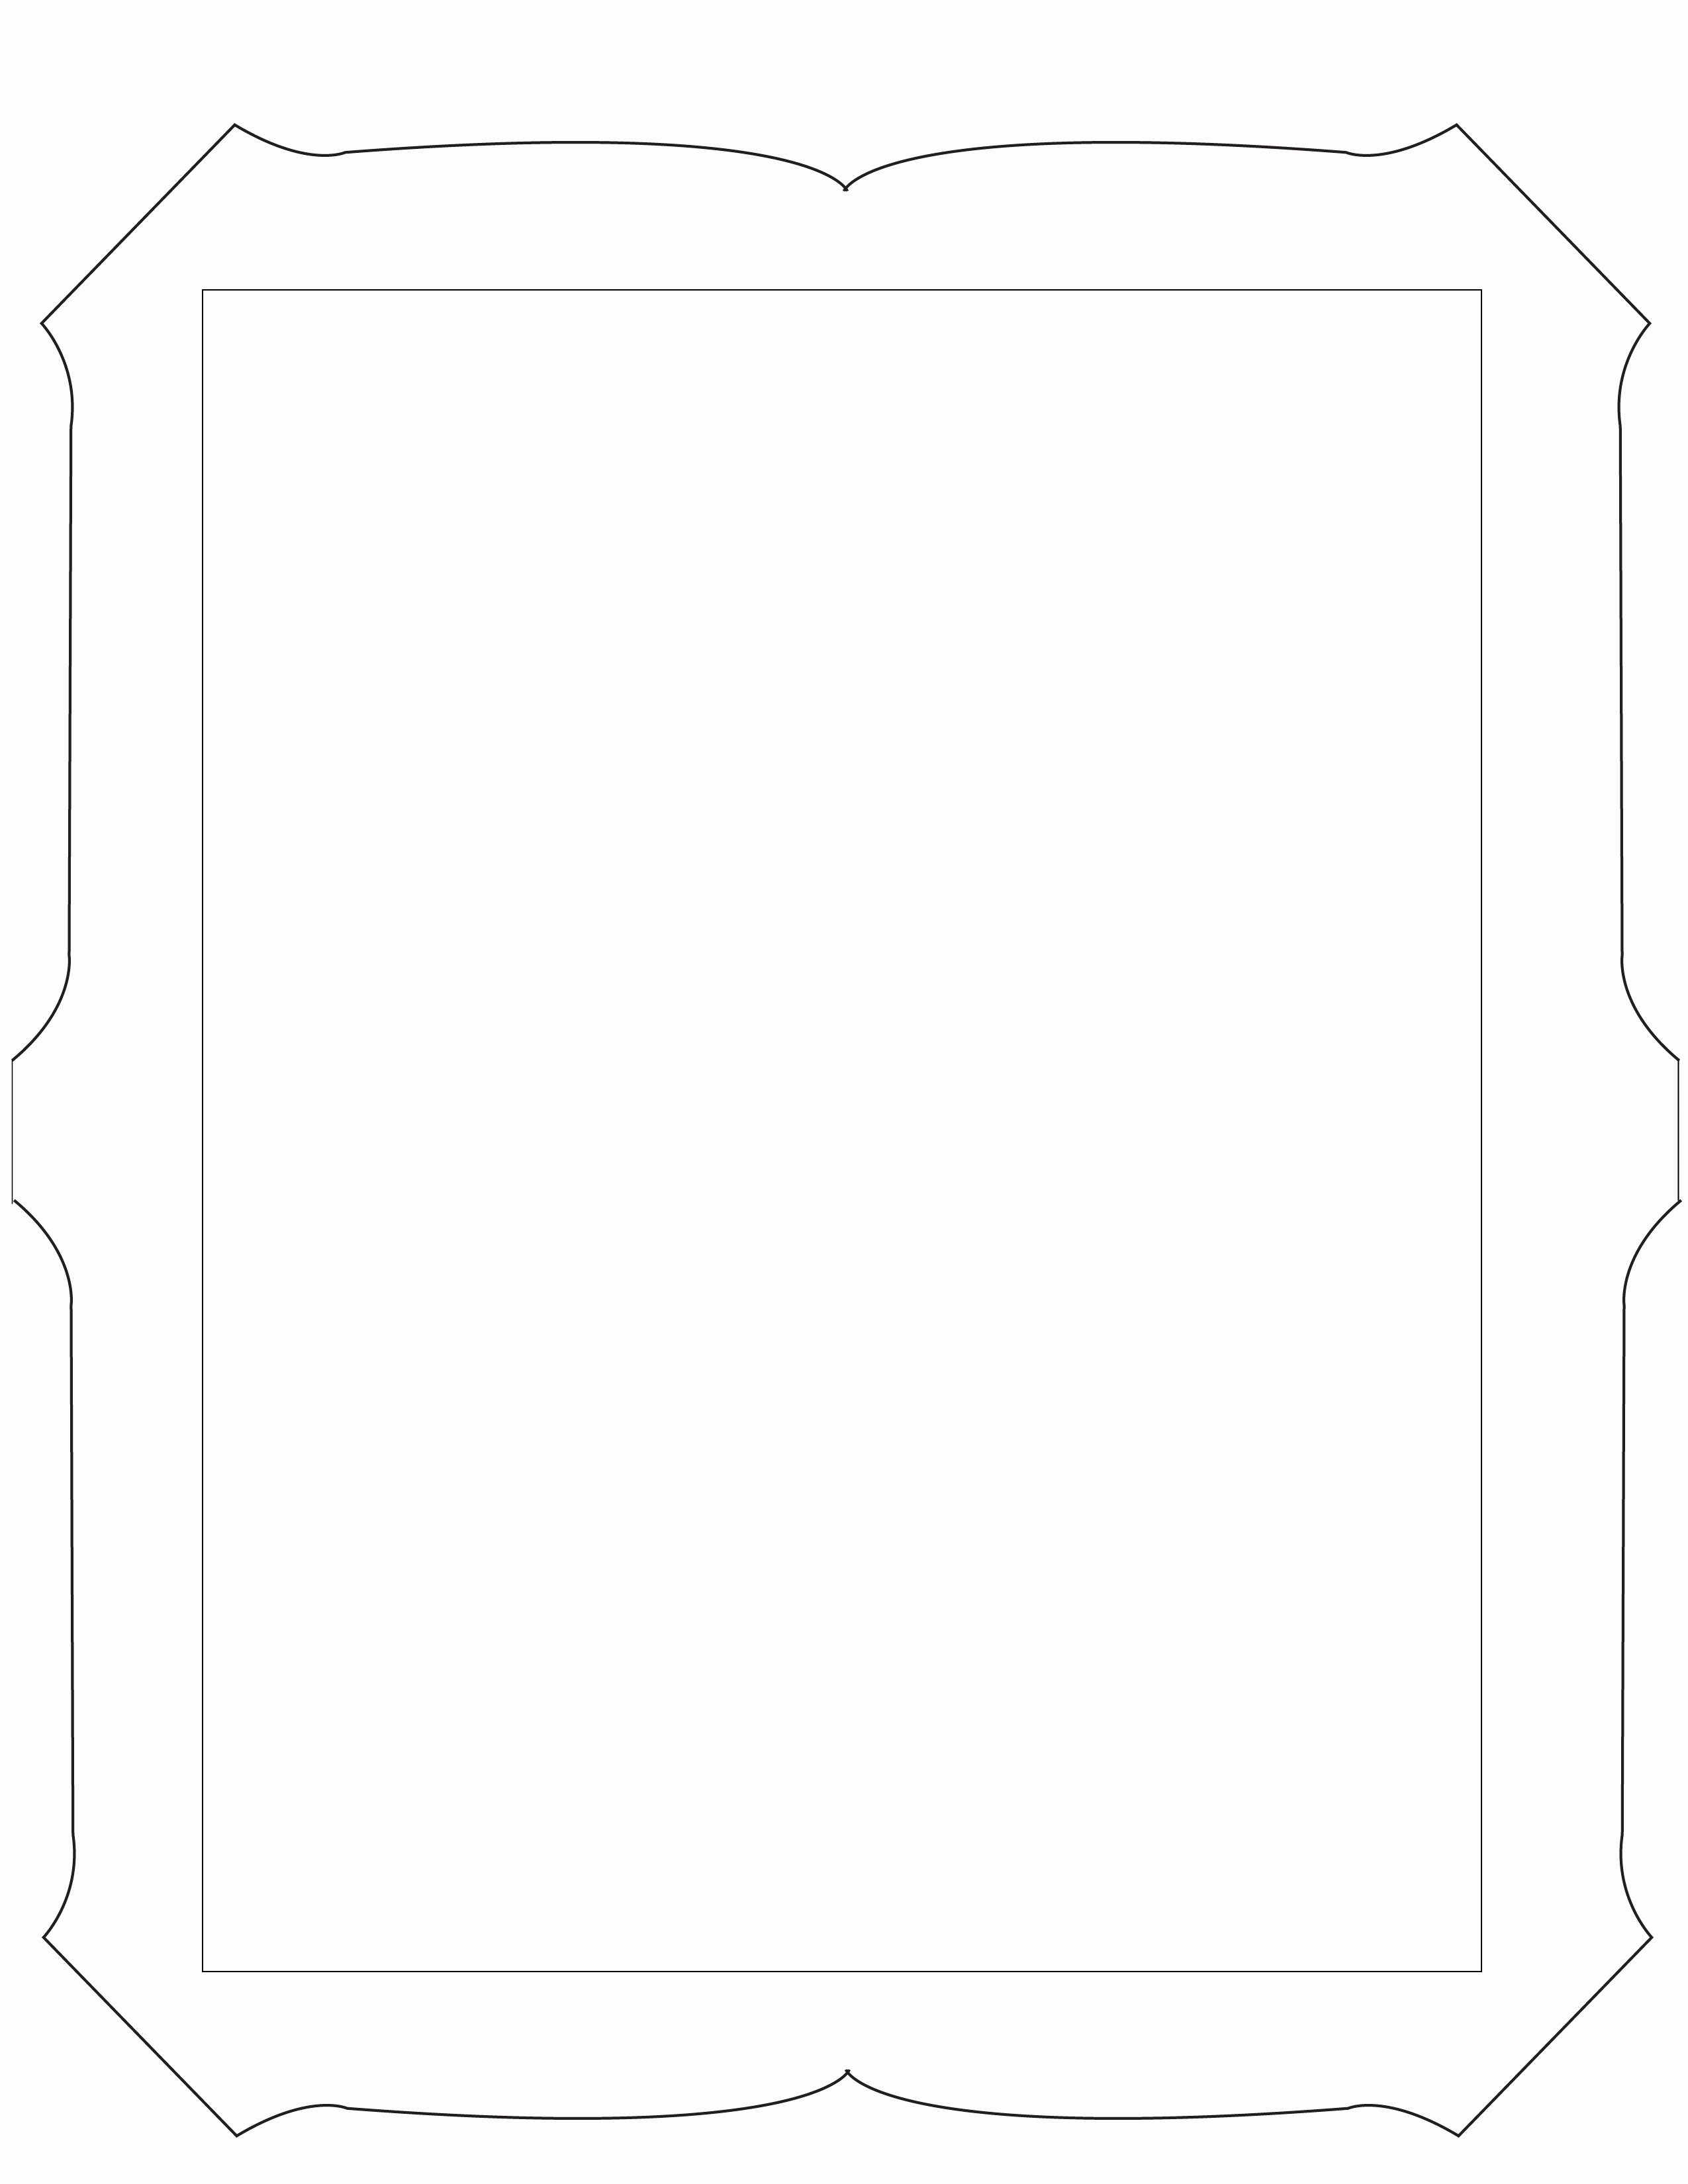 6 Best Of Cool Picture Frame Design Printable